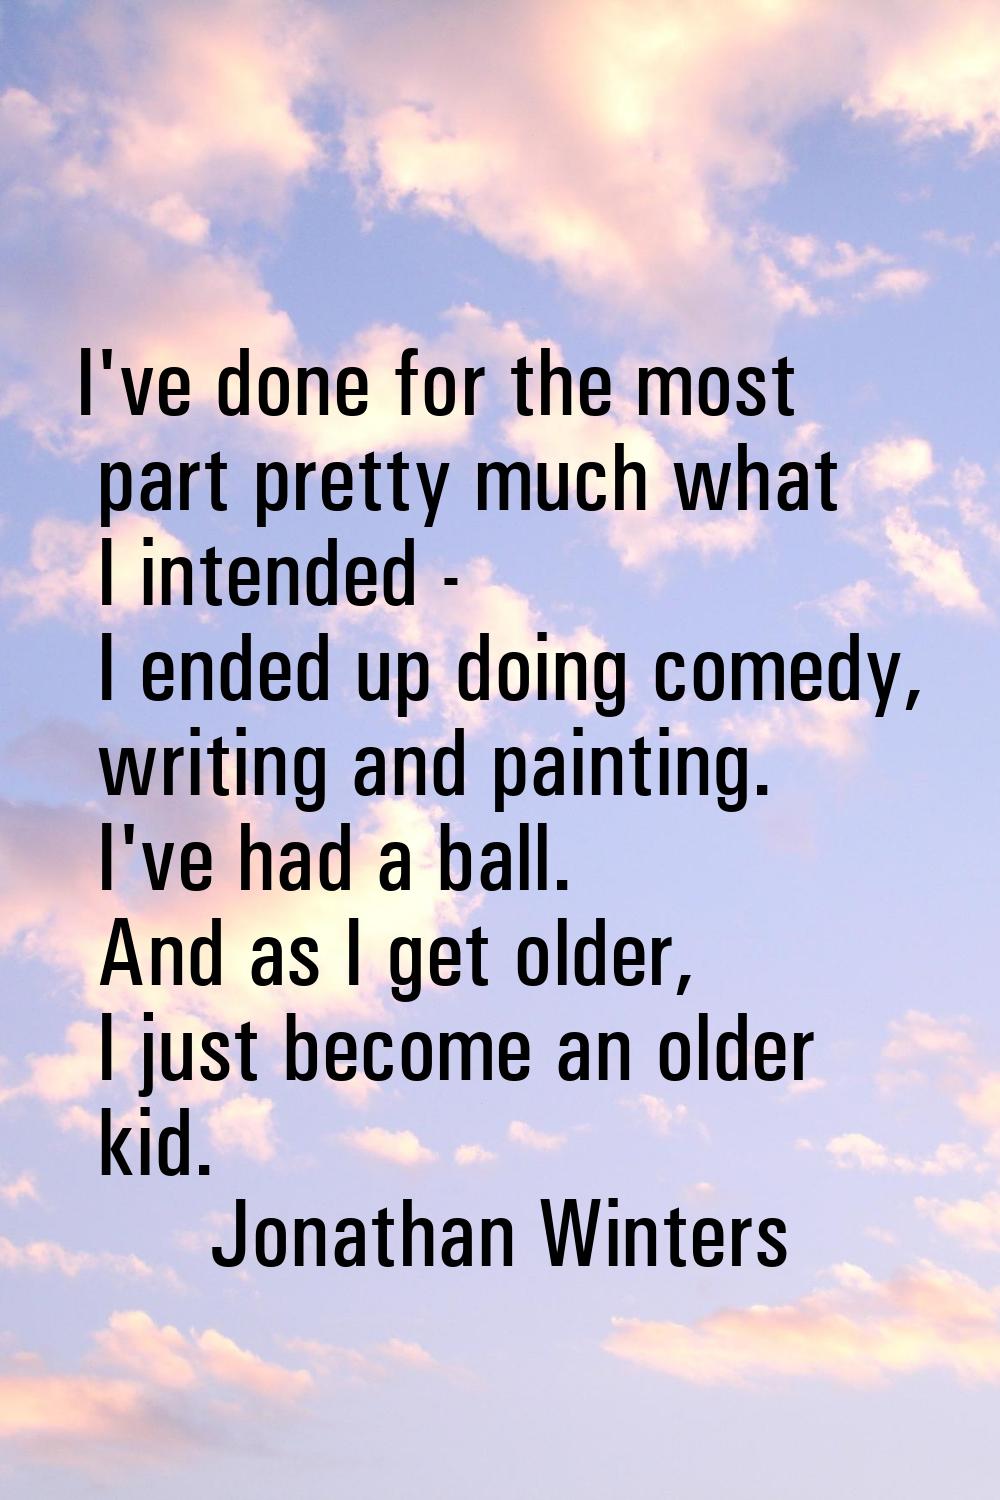 I've done for the most part pretty much what I intended - I ended up doing comedy, writing and pain